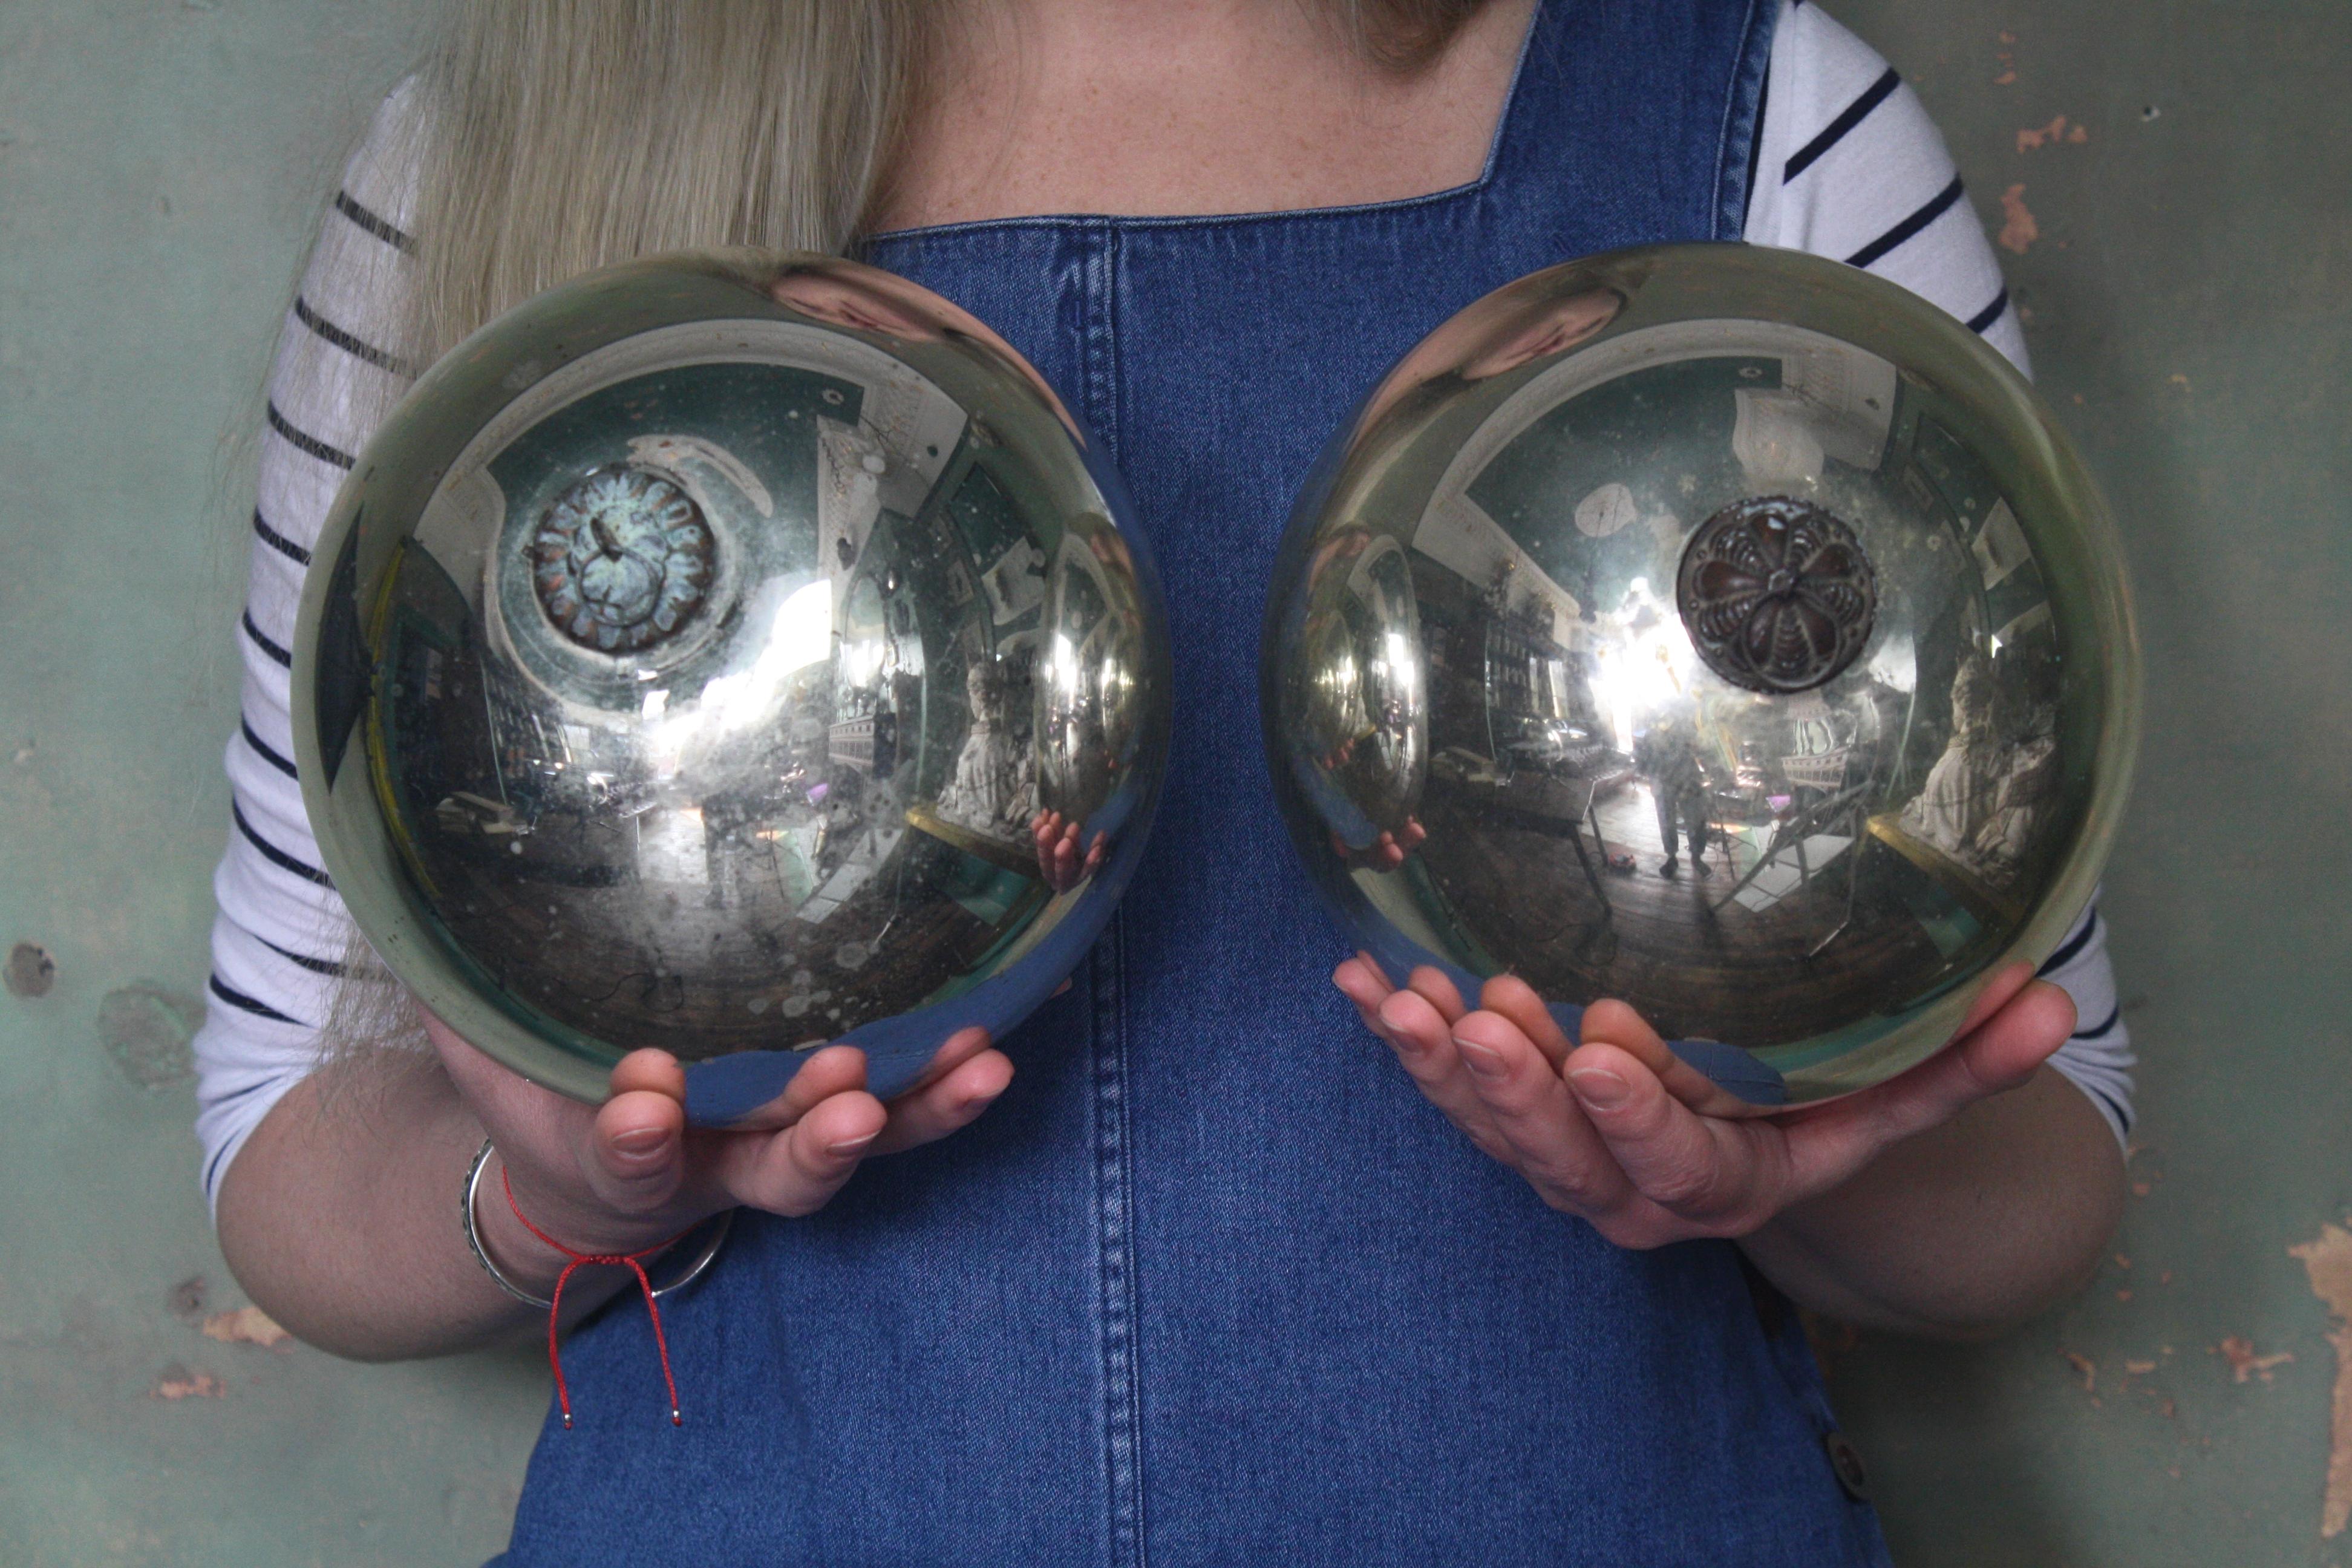 A pair of late 19th century balls with pressed copper galleries, both have pitting and oxidation consistent with age. One ball has a large section of deterioration to the bottom approx. measurements of both 18.5cm in diameter, 21.5cm in drop, 58cm